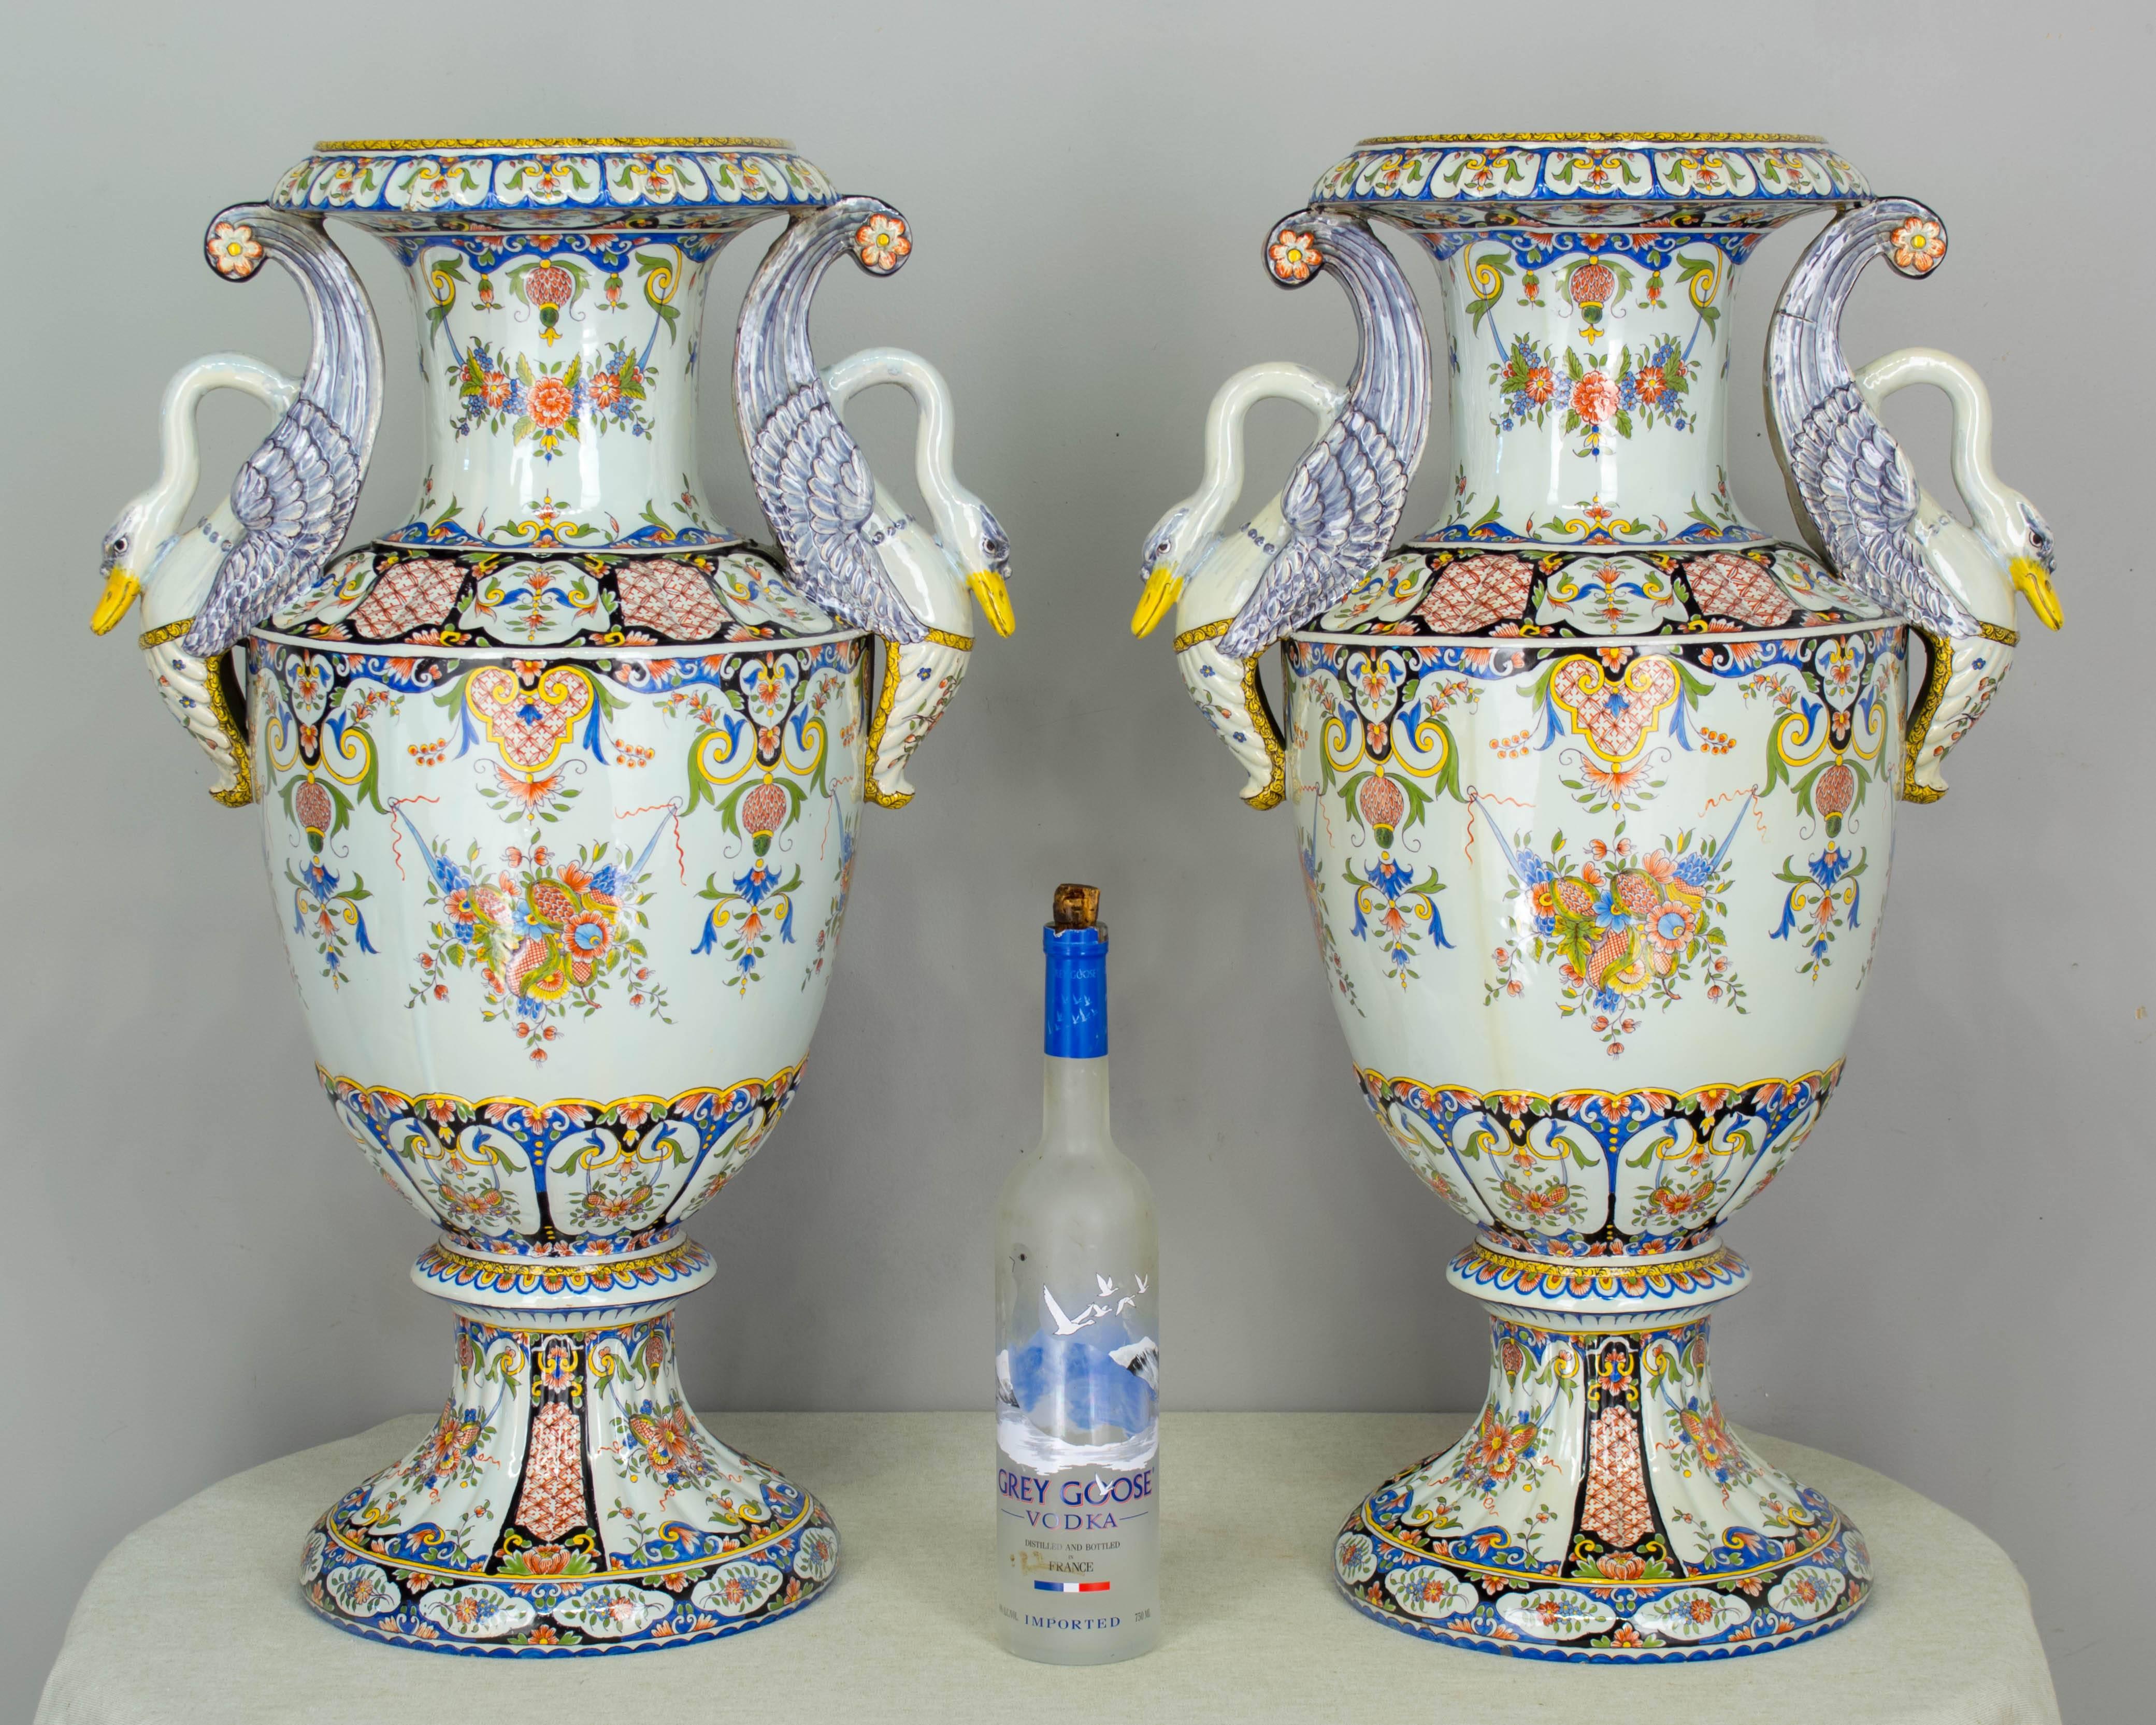 An exceptional pair of large 19th century French faience urns from Desvres, by Fourmaintraux-Freres. Beautiful hand-painted floral decoration and sculptural swan handles. Elegant form with nice proportions. In almost mint condition with the beak of